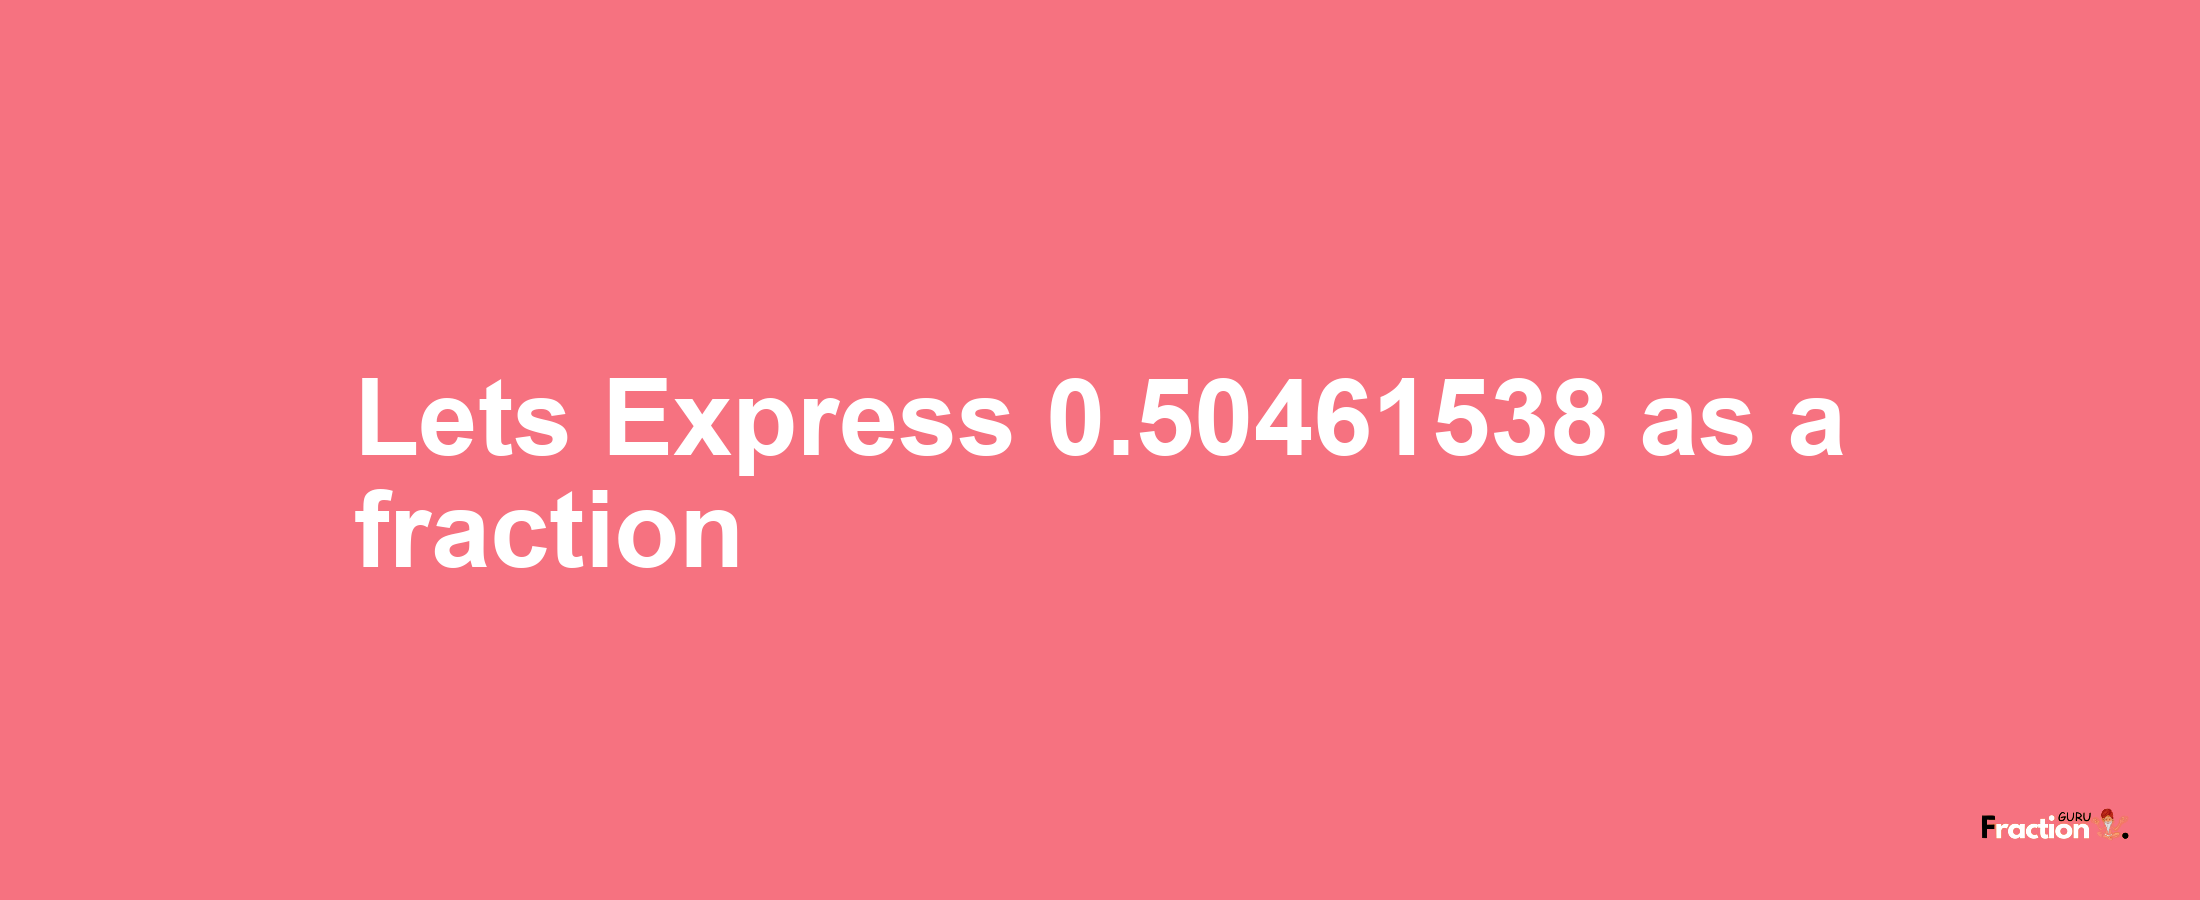 Lets Express 0.50461538 as afraction